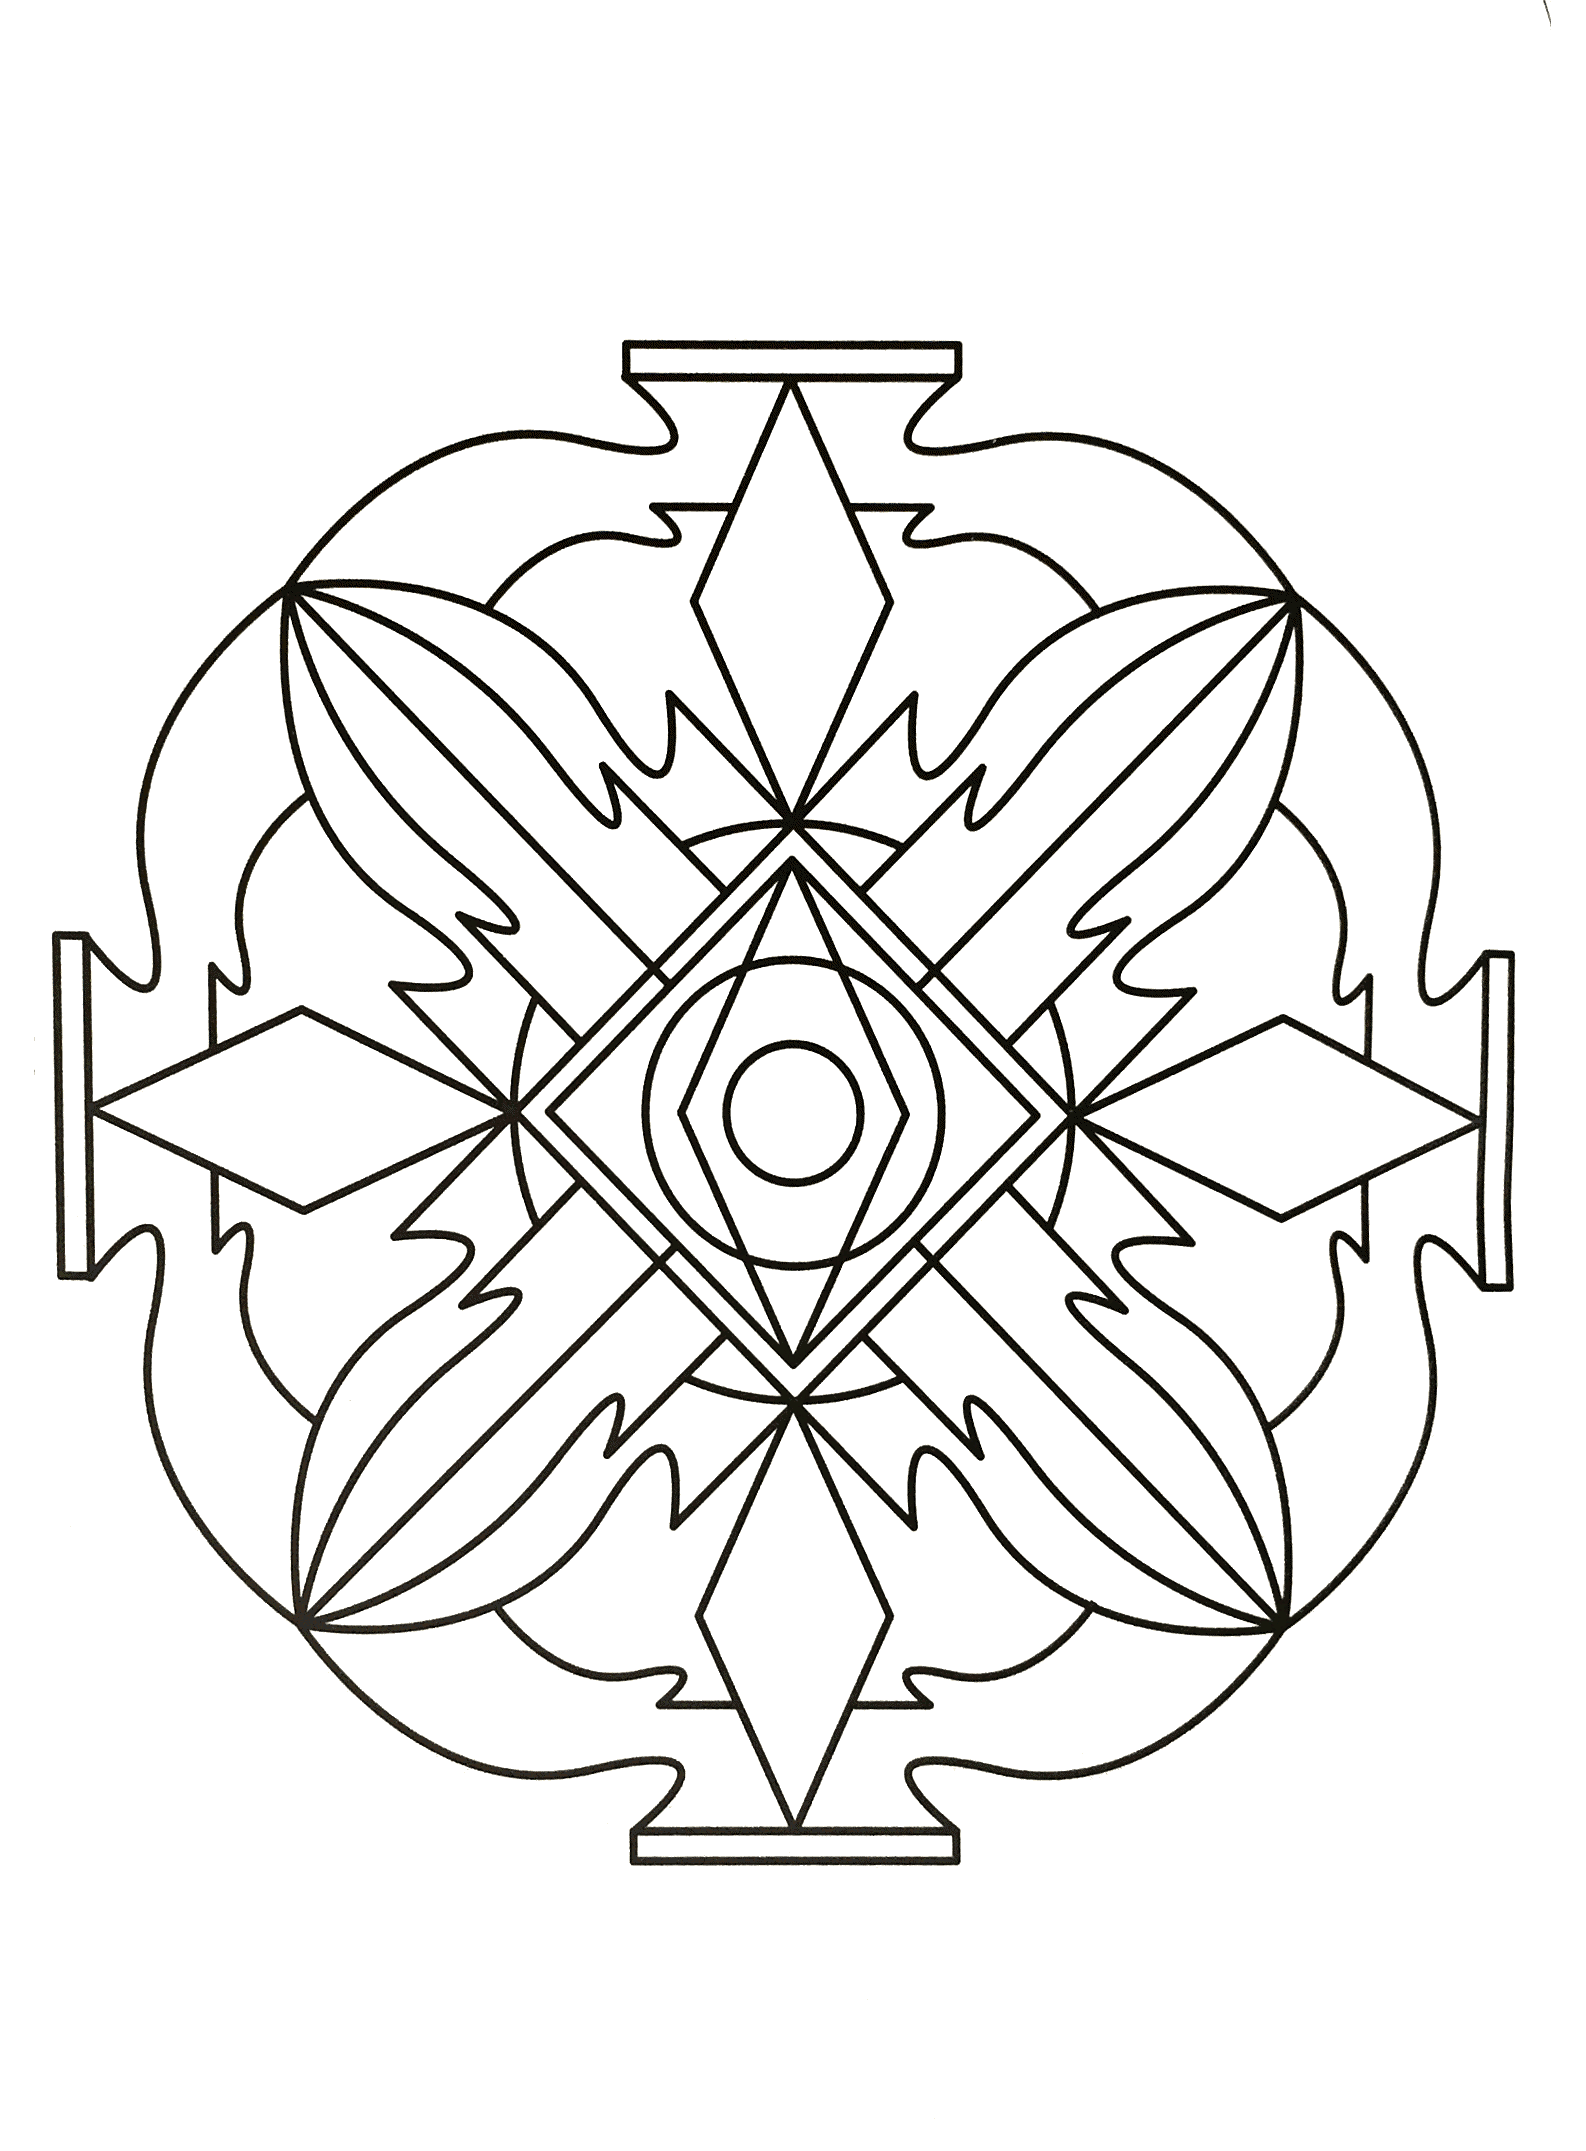 Mandalas to download for free - 6 - Image with : , 